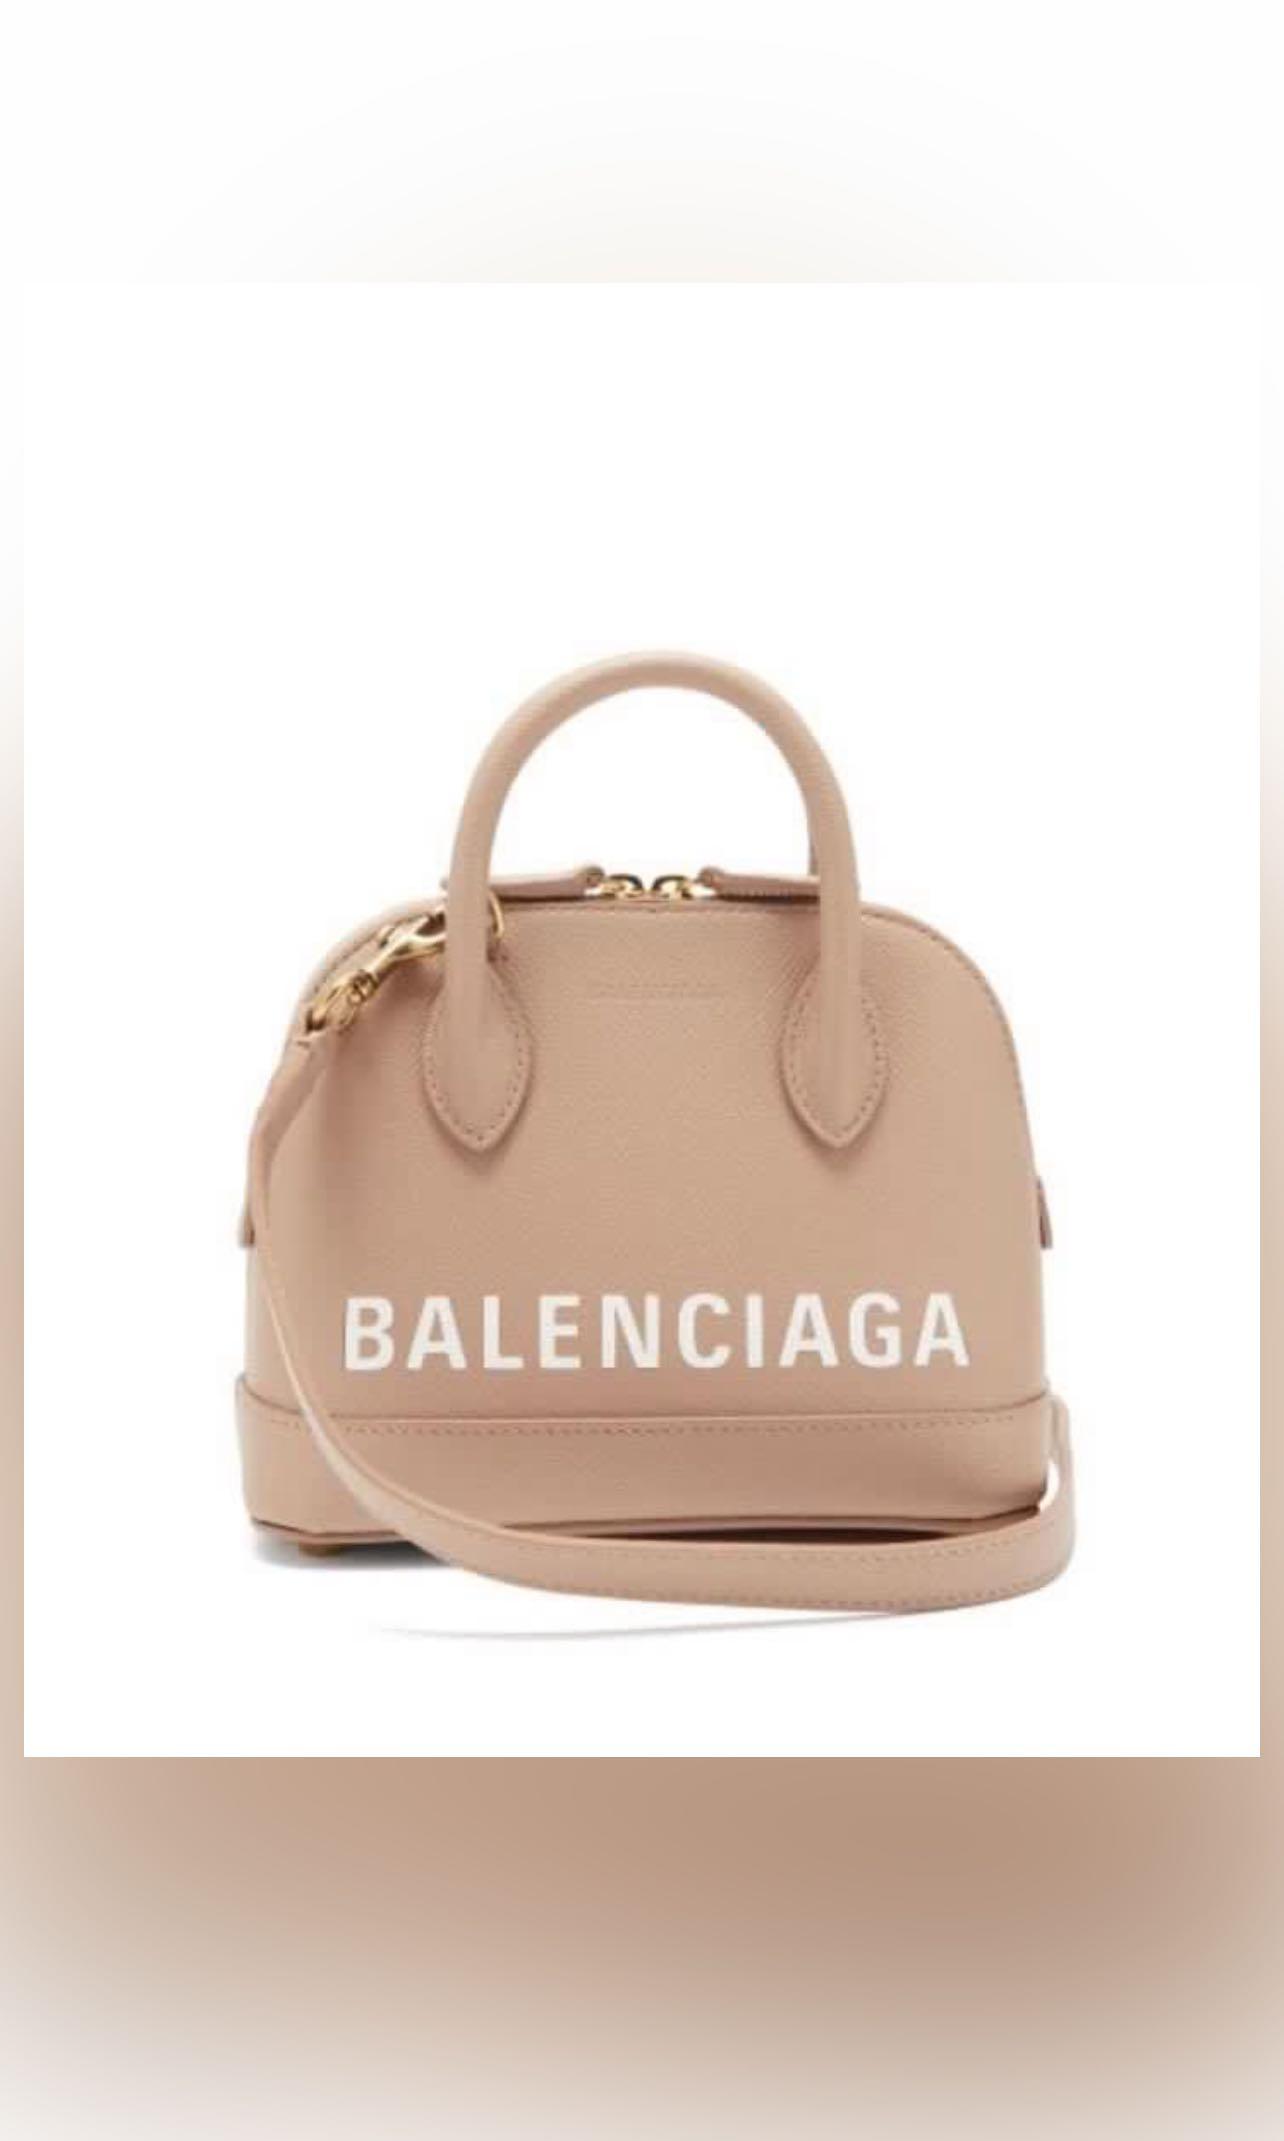 What Is The Balenciaga City Bag And Why Do Celebs Love It